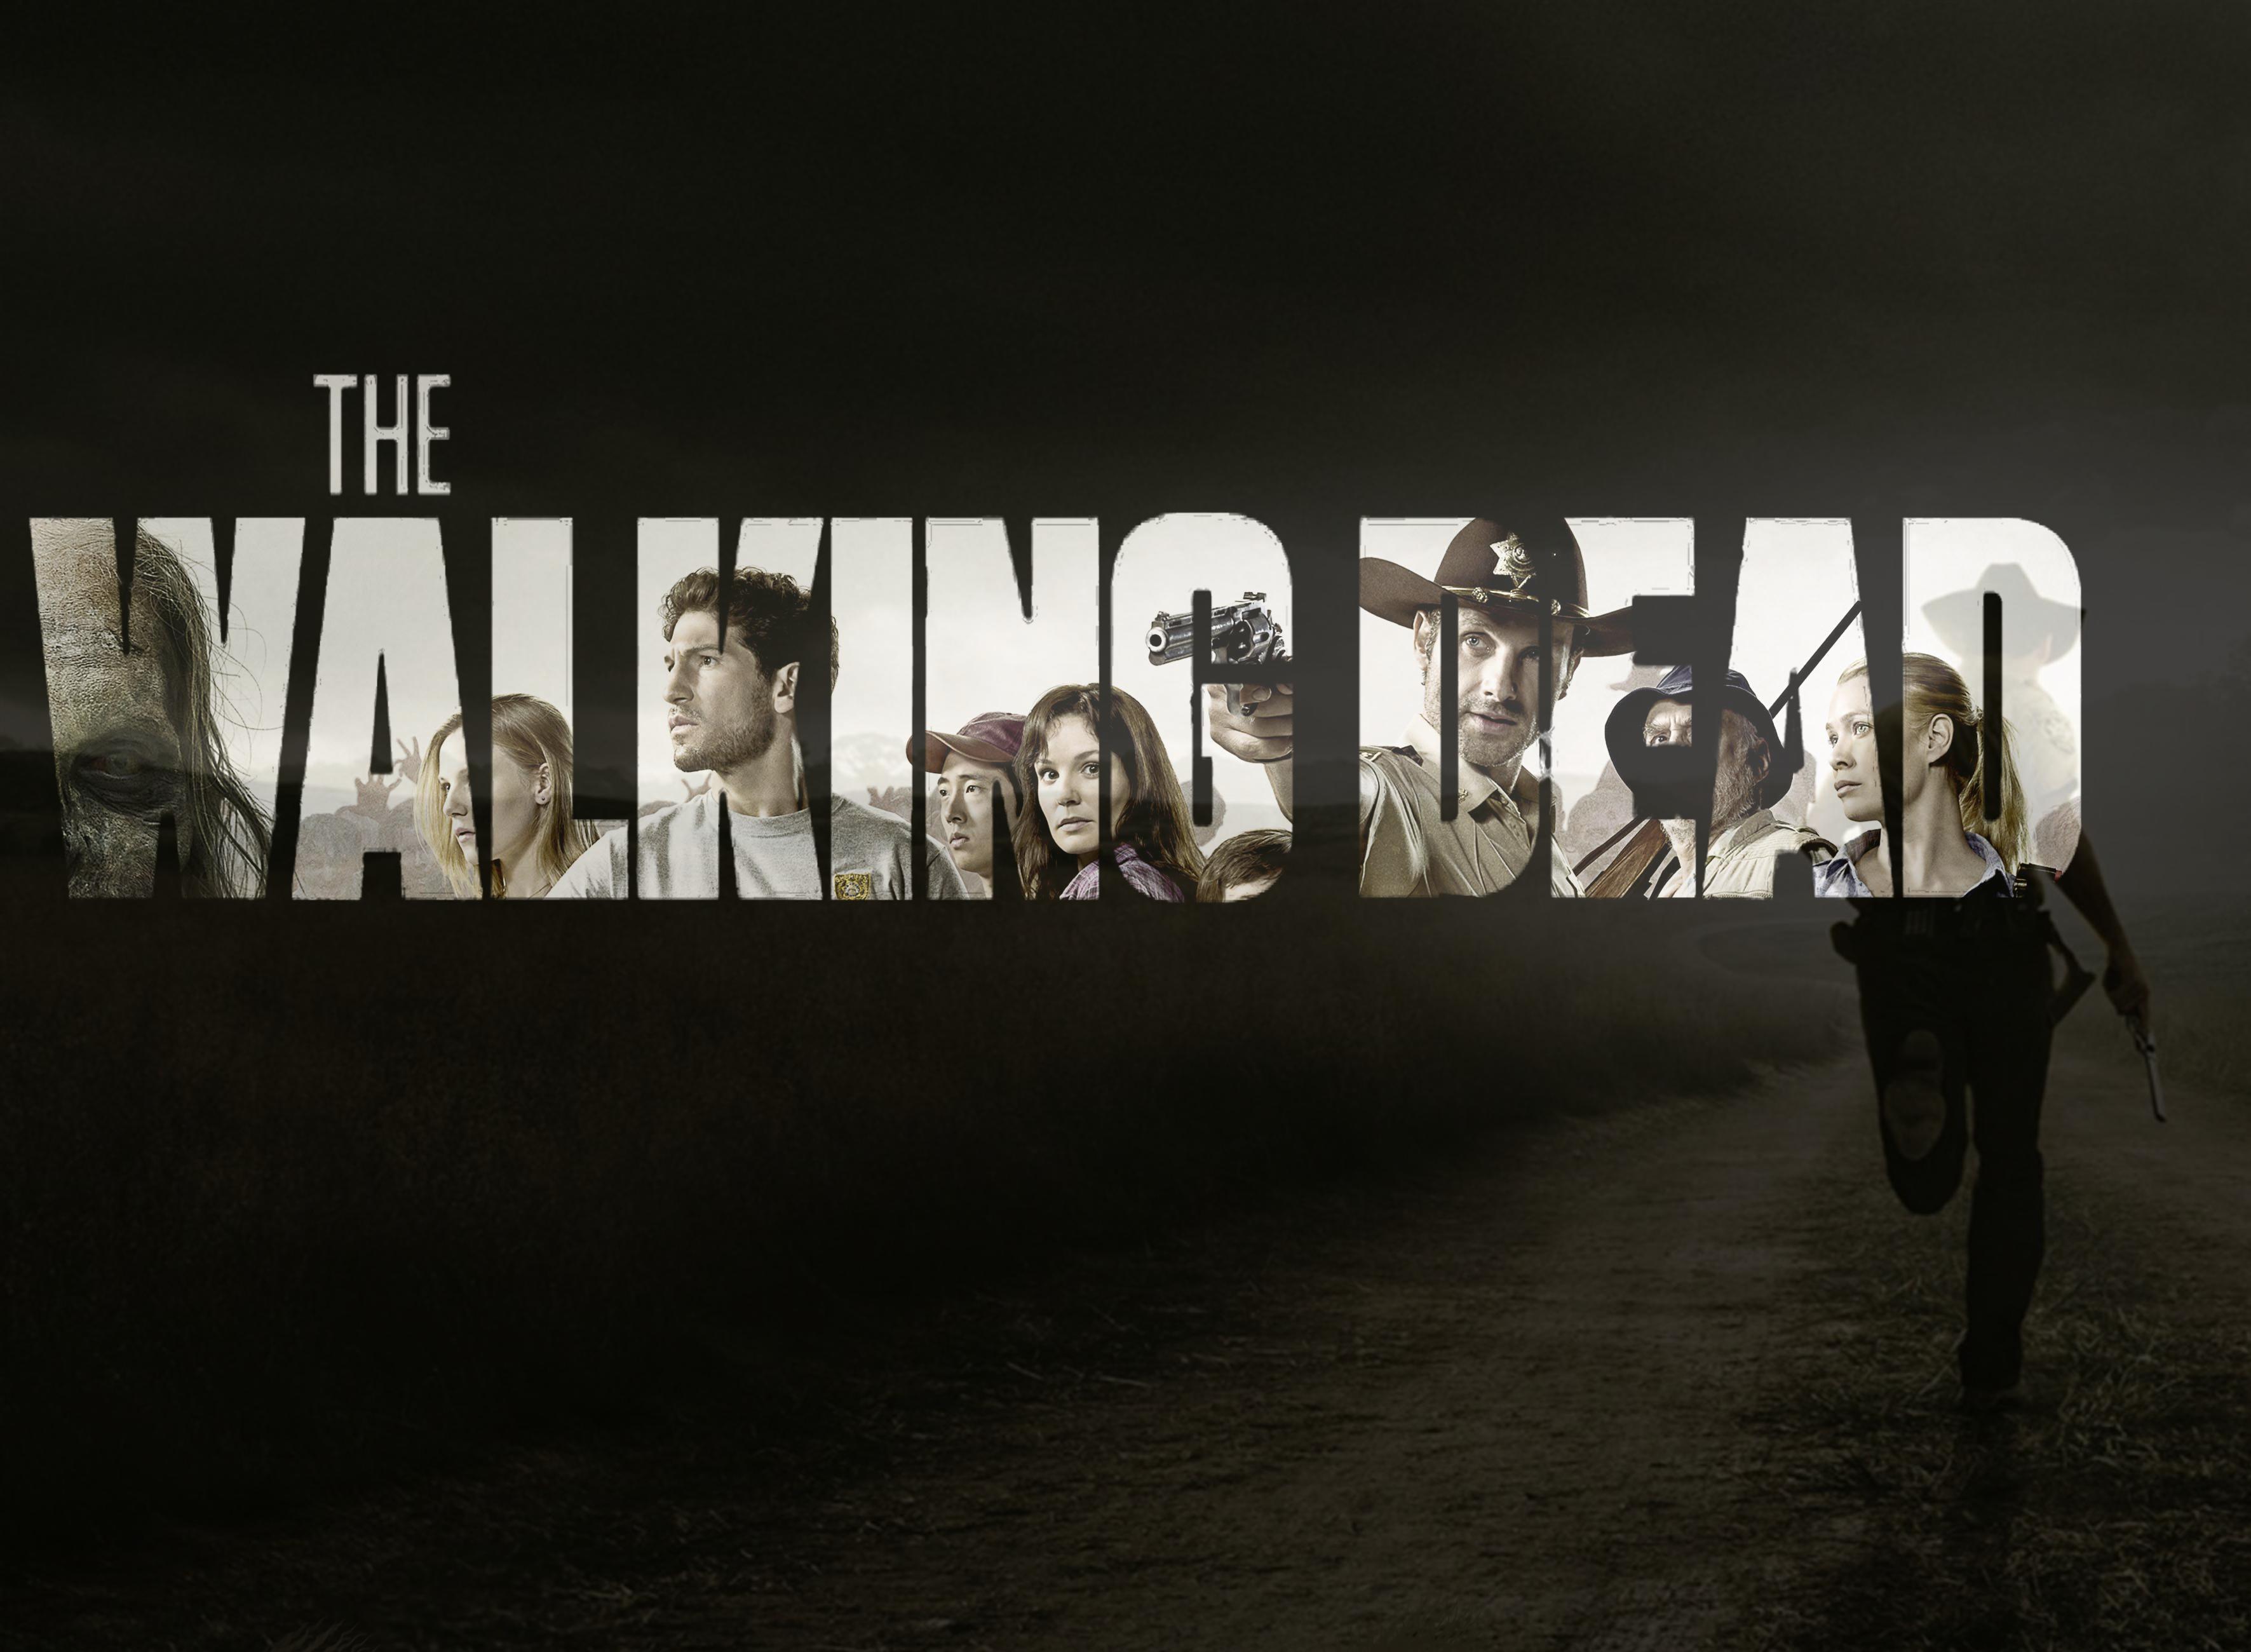 My friend requested a walking dead wallpaper. so I delivered